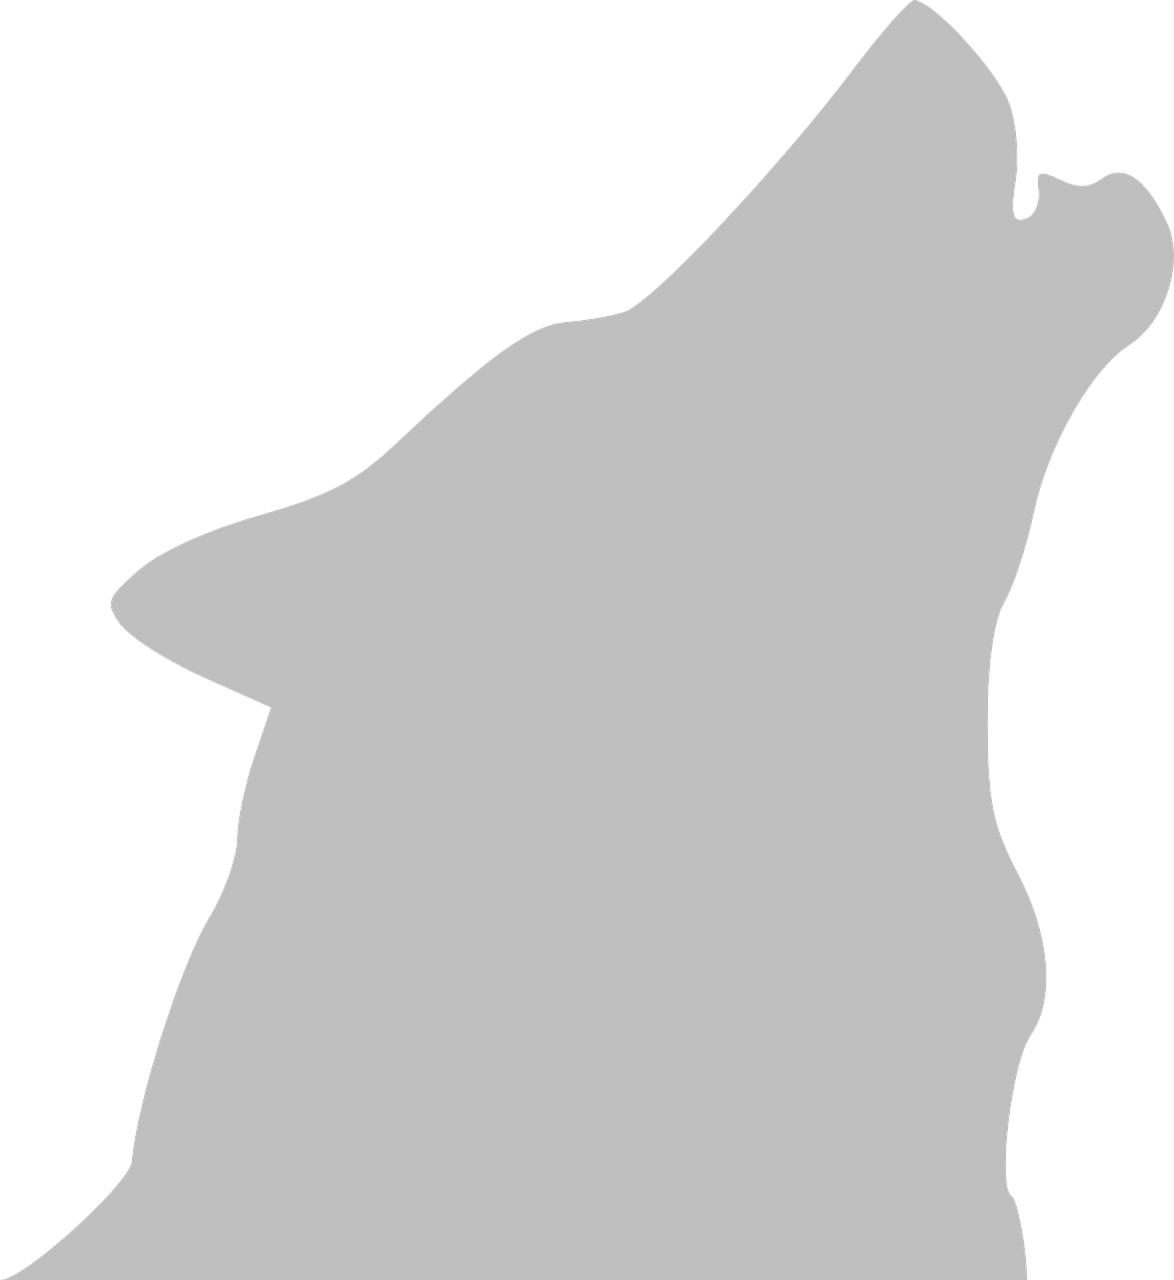 Majestic Howling Wolf Silhouette PNG